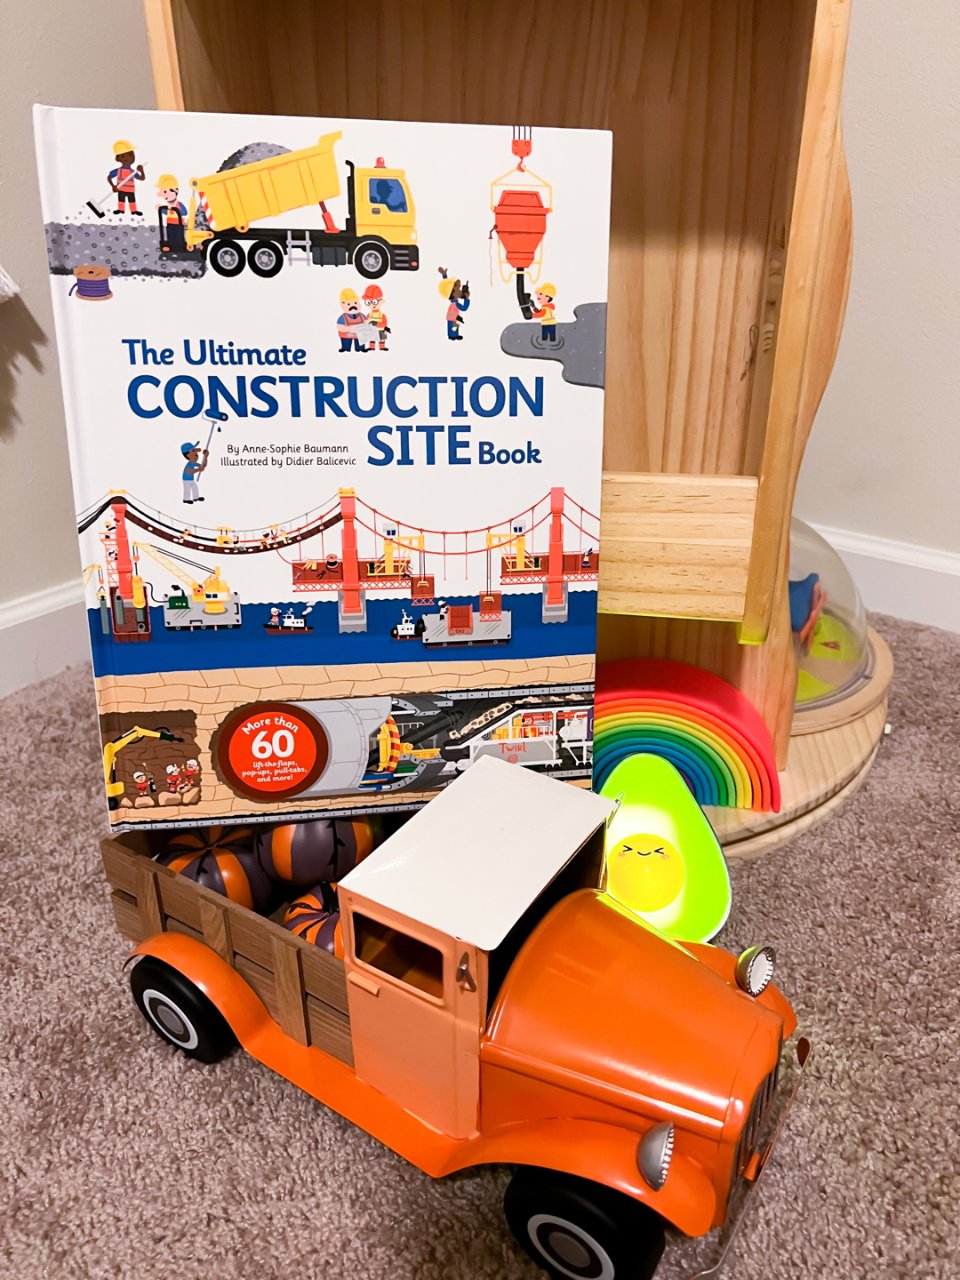 The Ultimate Construction Site Book (Ultimate Book, 2): Baumann, Anne-Sophie, Balicevic, Didier: 9782848019840: Amazon.com: Books